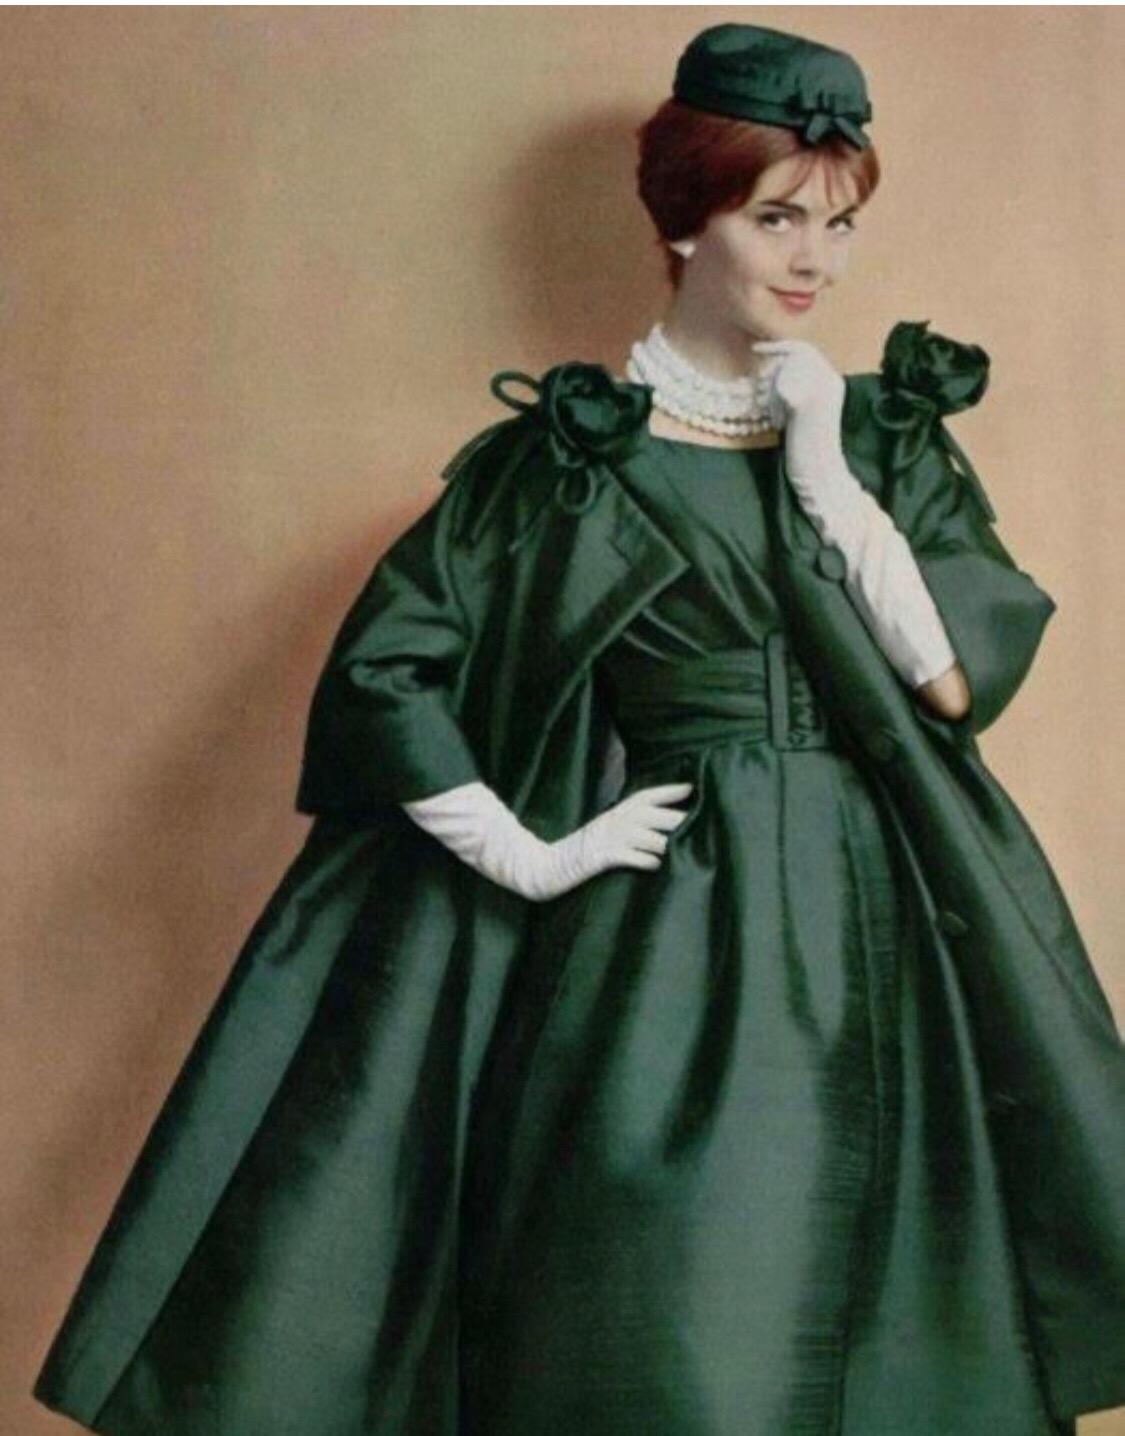 Christian Dior Printemps 1959 Numbered Haute Couture Coat by Yves Saint Laurent.
This green coat from Christian Dior Spring Summer 1959 was designed by Yves Saint Laurent. 
Yves Saint Laurent was hired by Dior in 1955 when he was 21 and worked